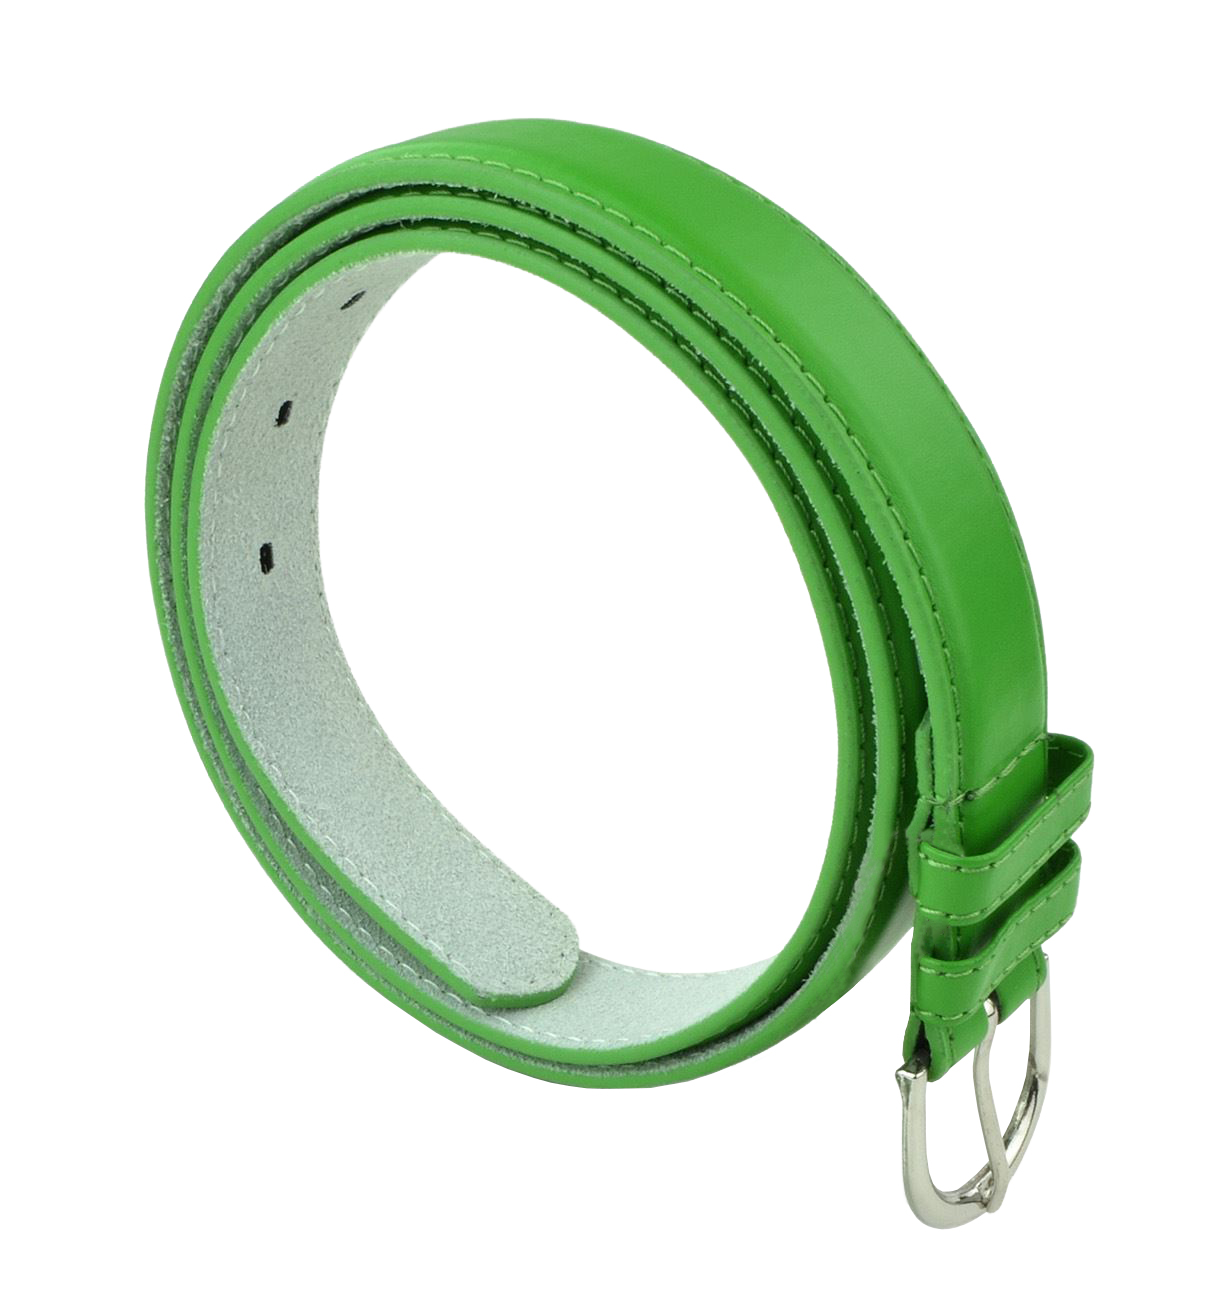 Womens Chic Dress Belt Bonded Leather Polished Buckle - Fd Green Small